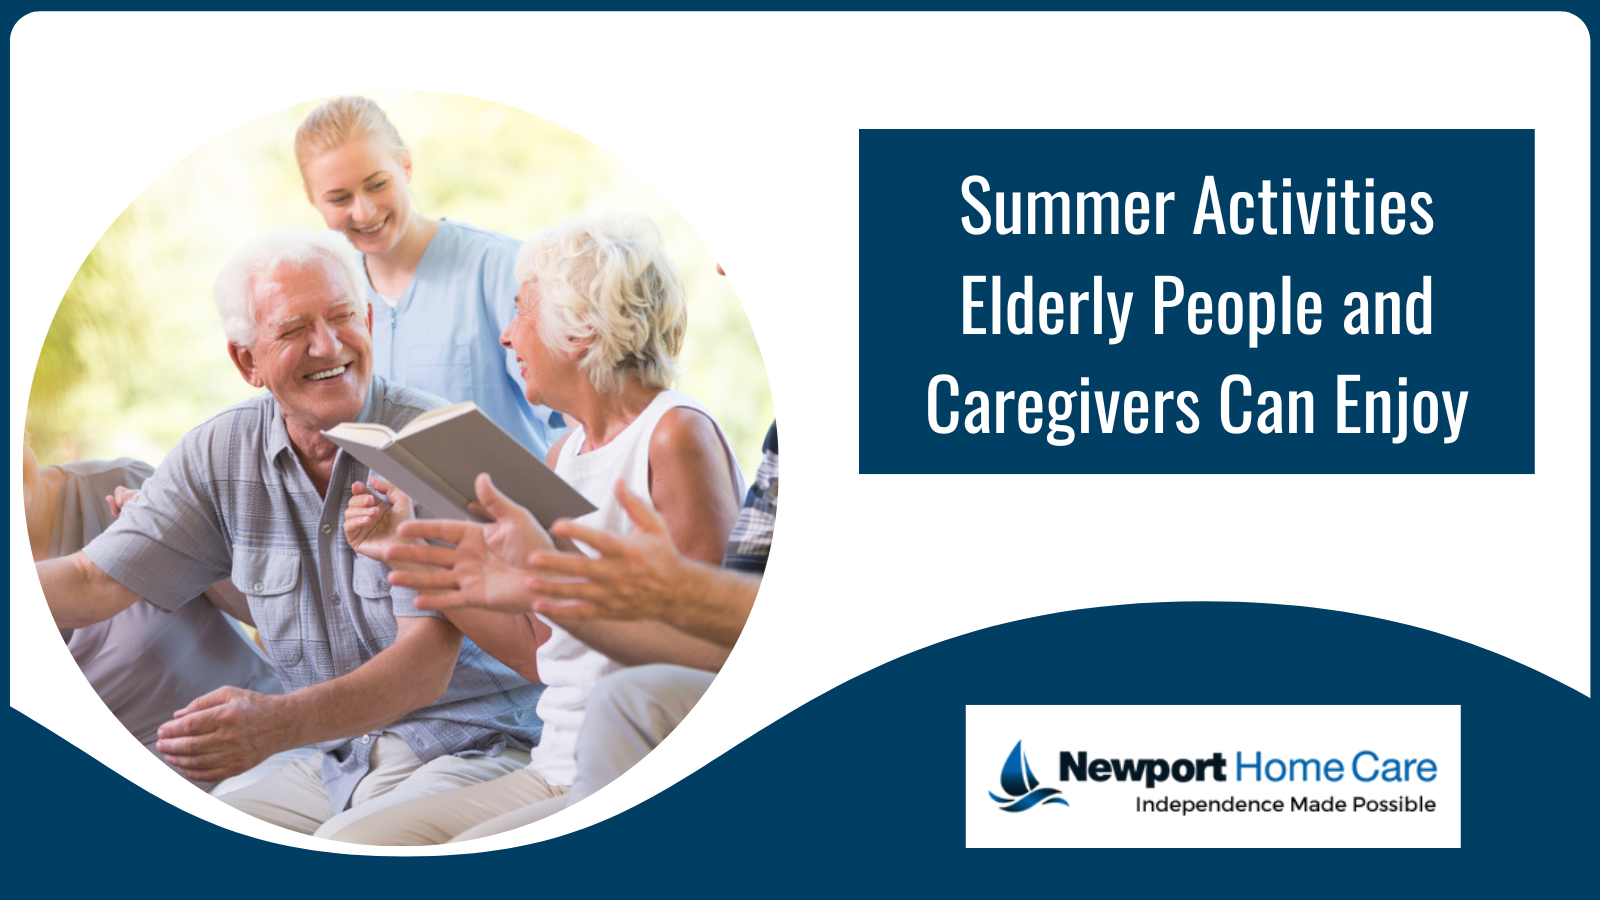 Summer Activities Elderly People and Caregivers Can Enjoy